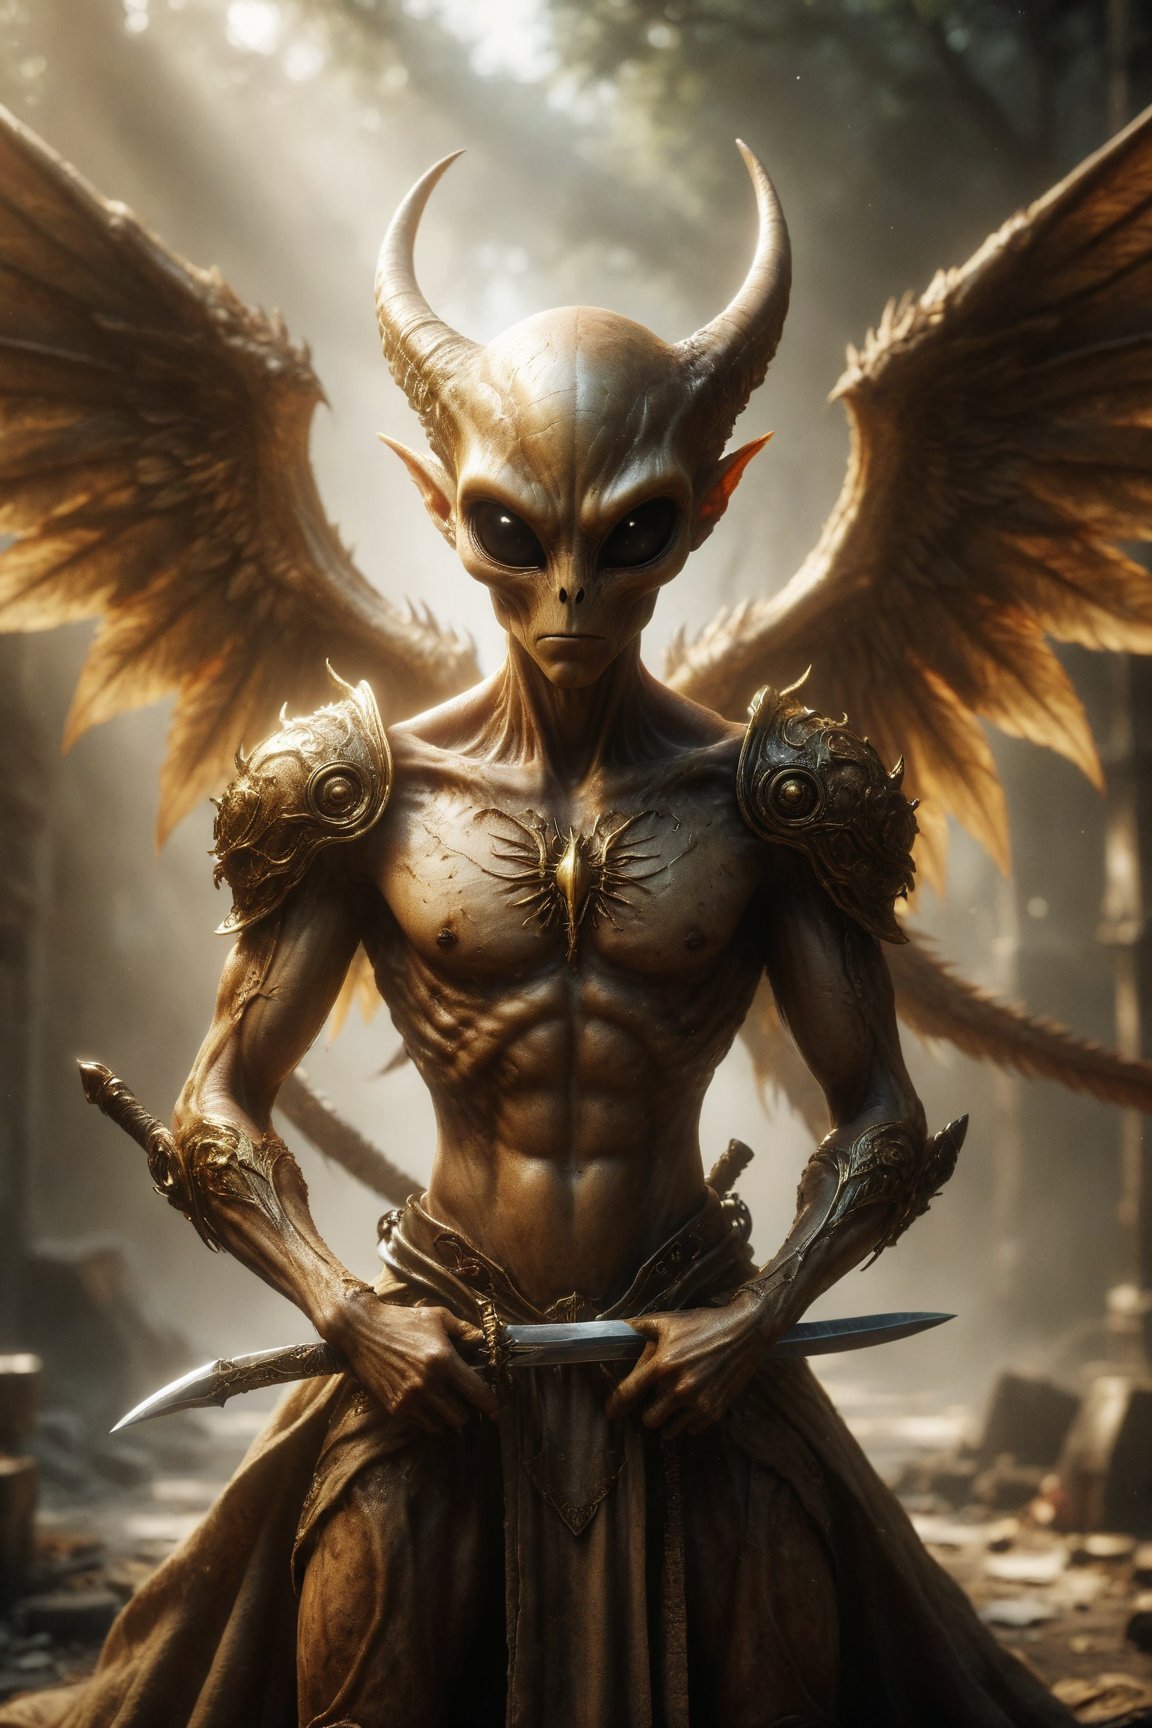 Create an image of a luxurious golden alien with wings and horns holding 5 swords in both hands and two swords stuck next to the character
